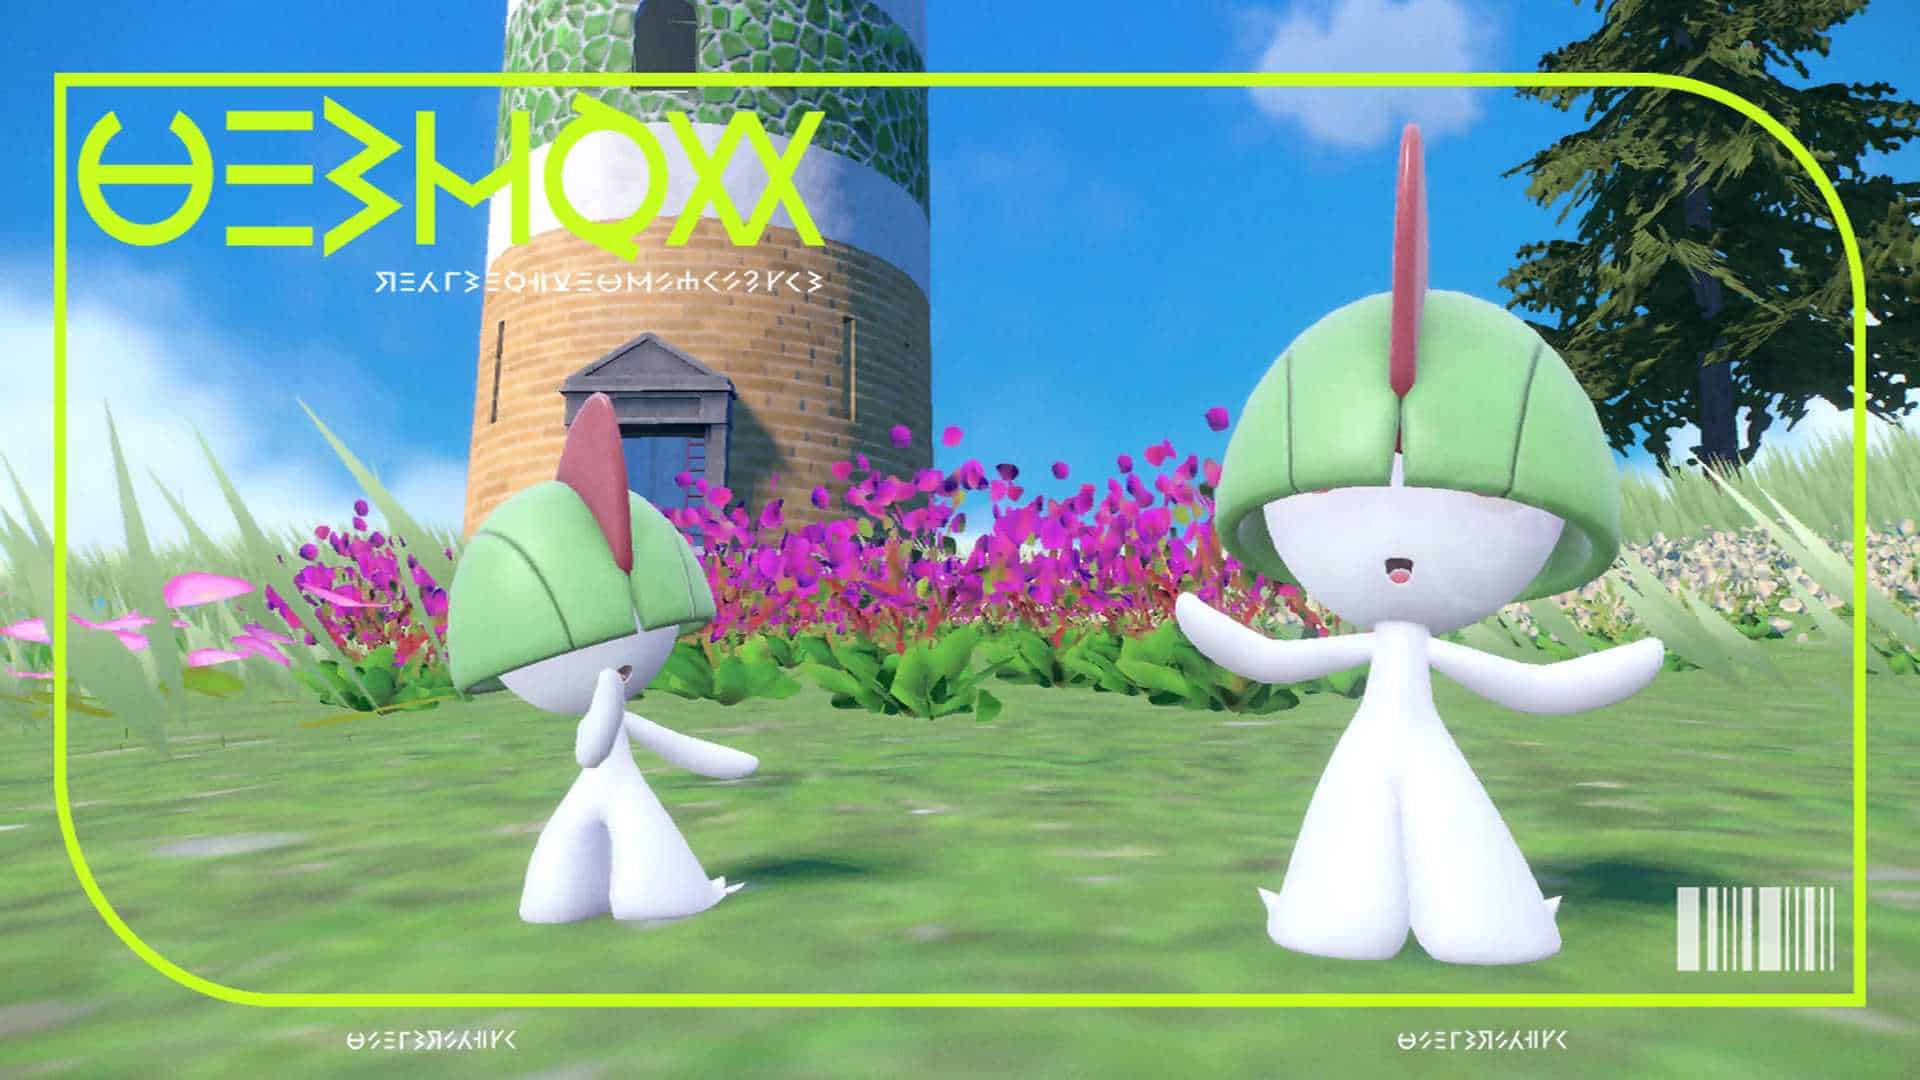 Secondary Types Hinted at for Pokémon X and Pokémon Y Starters